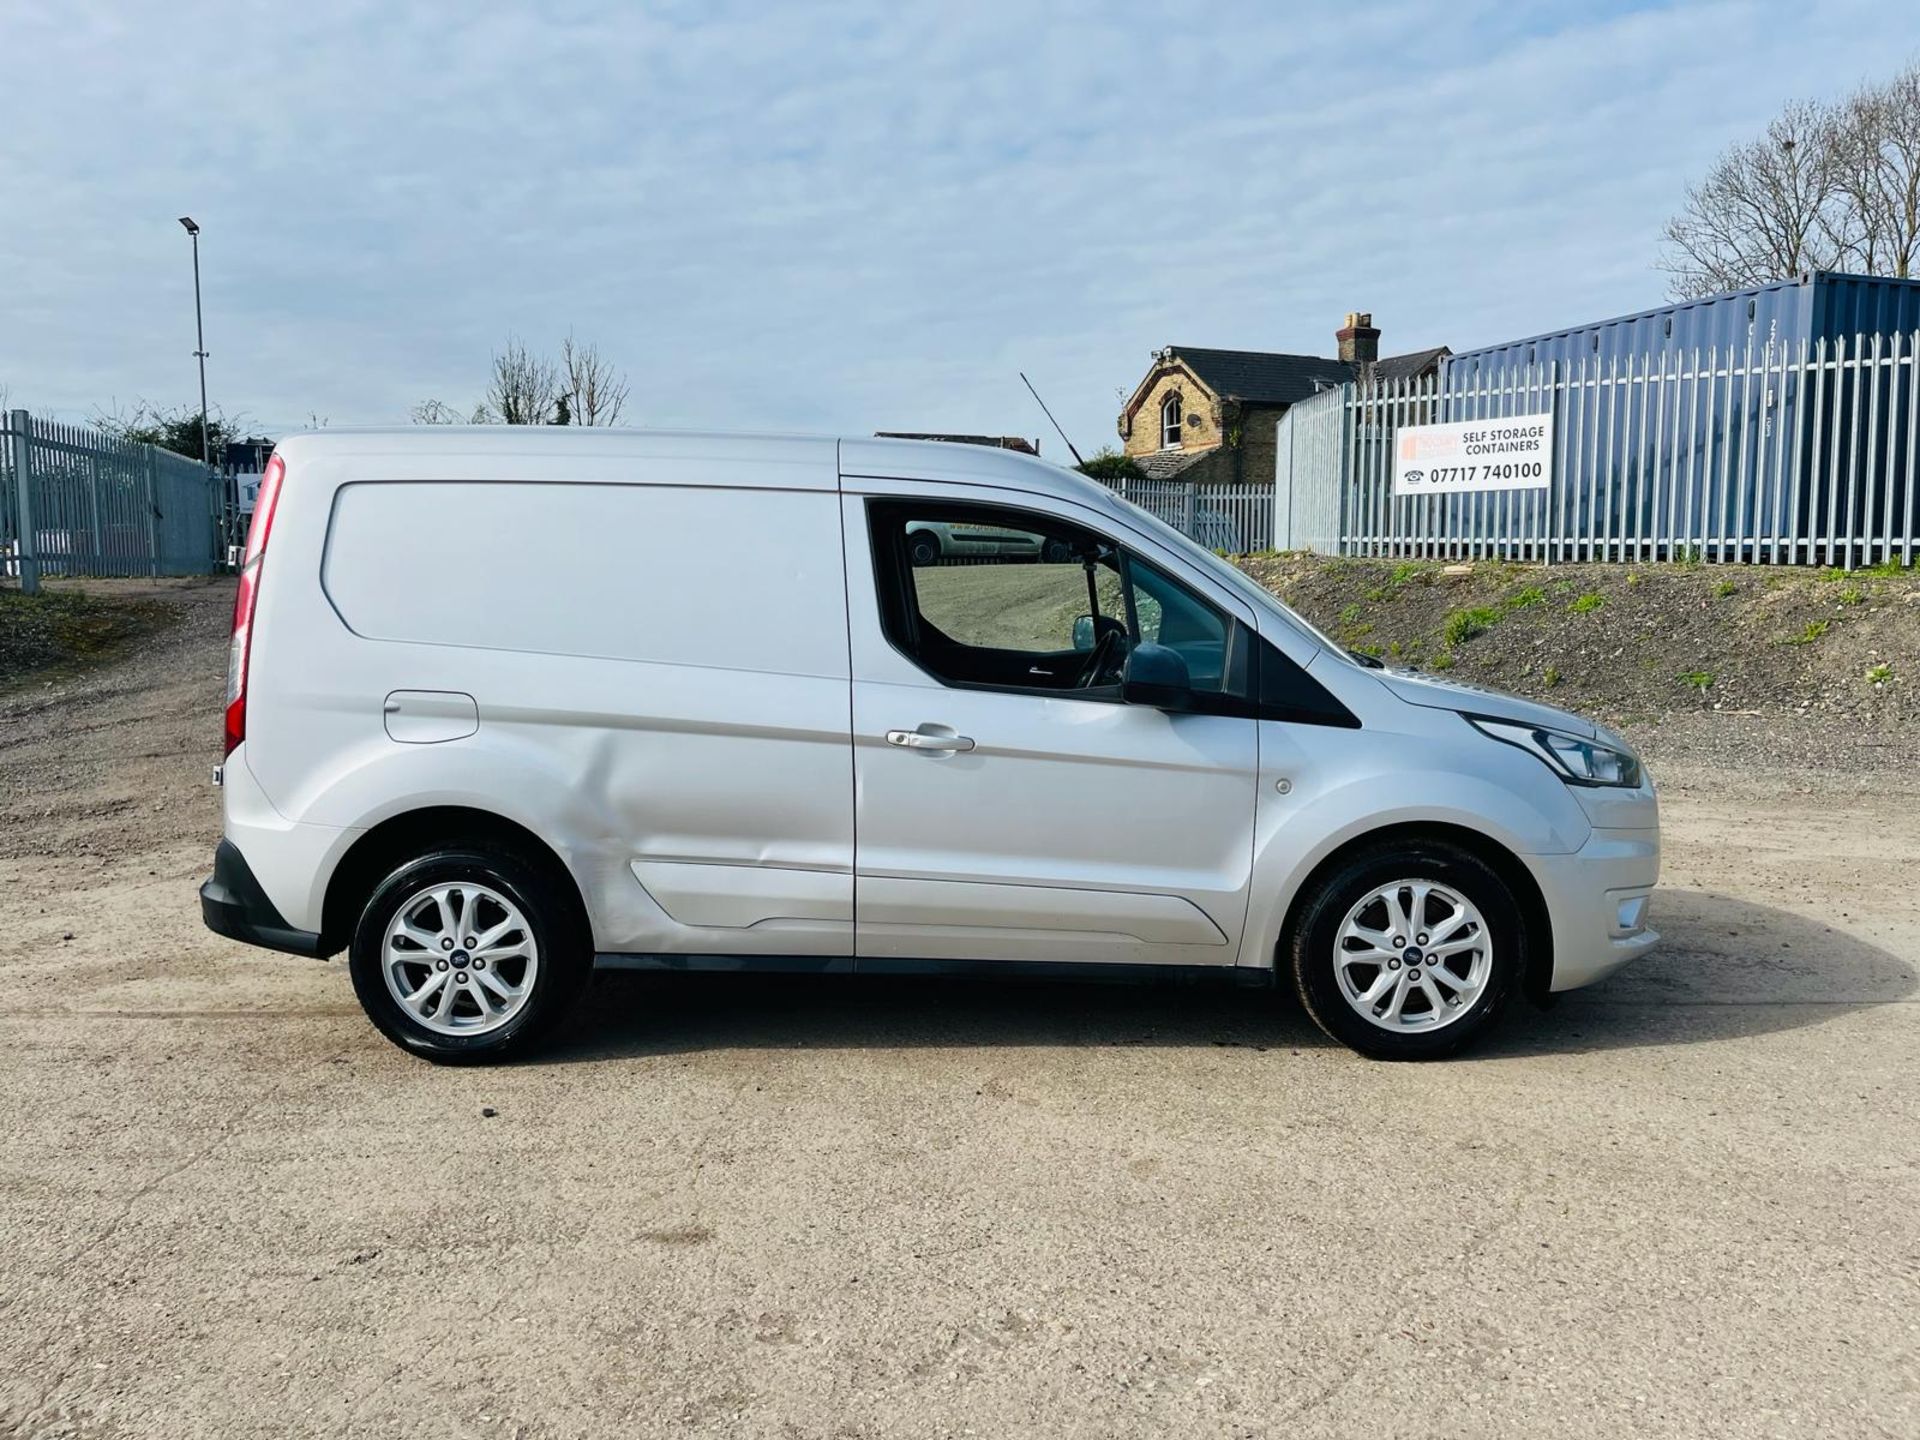 Ford Transit Connect 1.5 TDCI L1H1-2020 '70 Reg'- 1 Previous Owner -Alloy Wheels -Sat Nav - A/C - Image 13 of 28